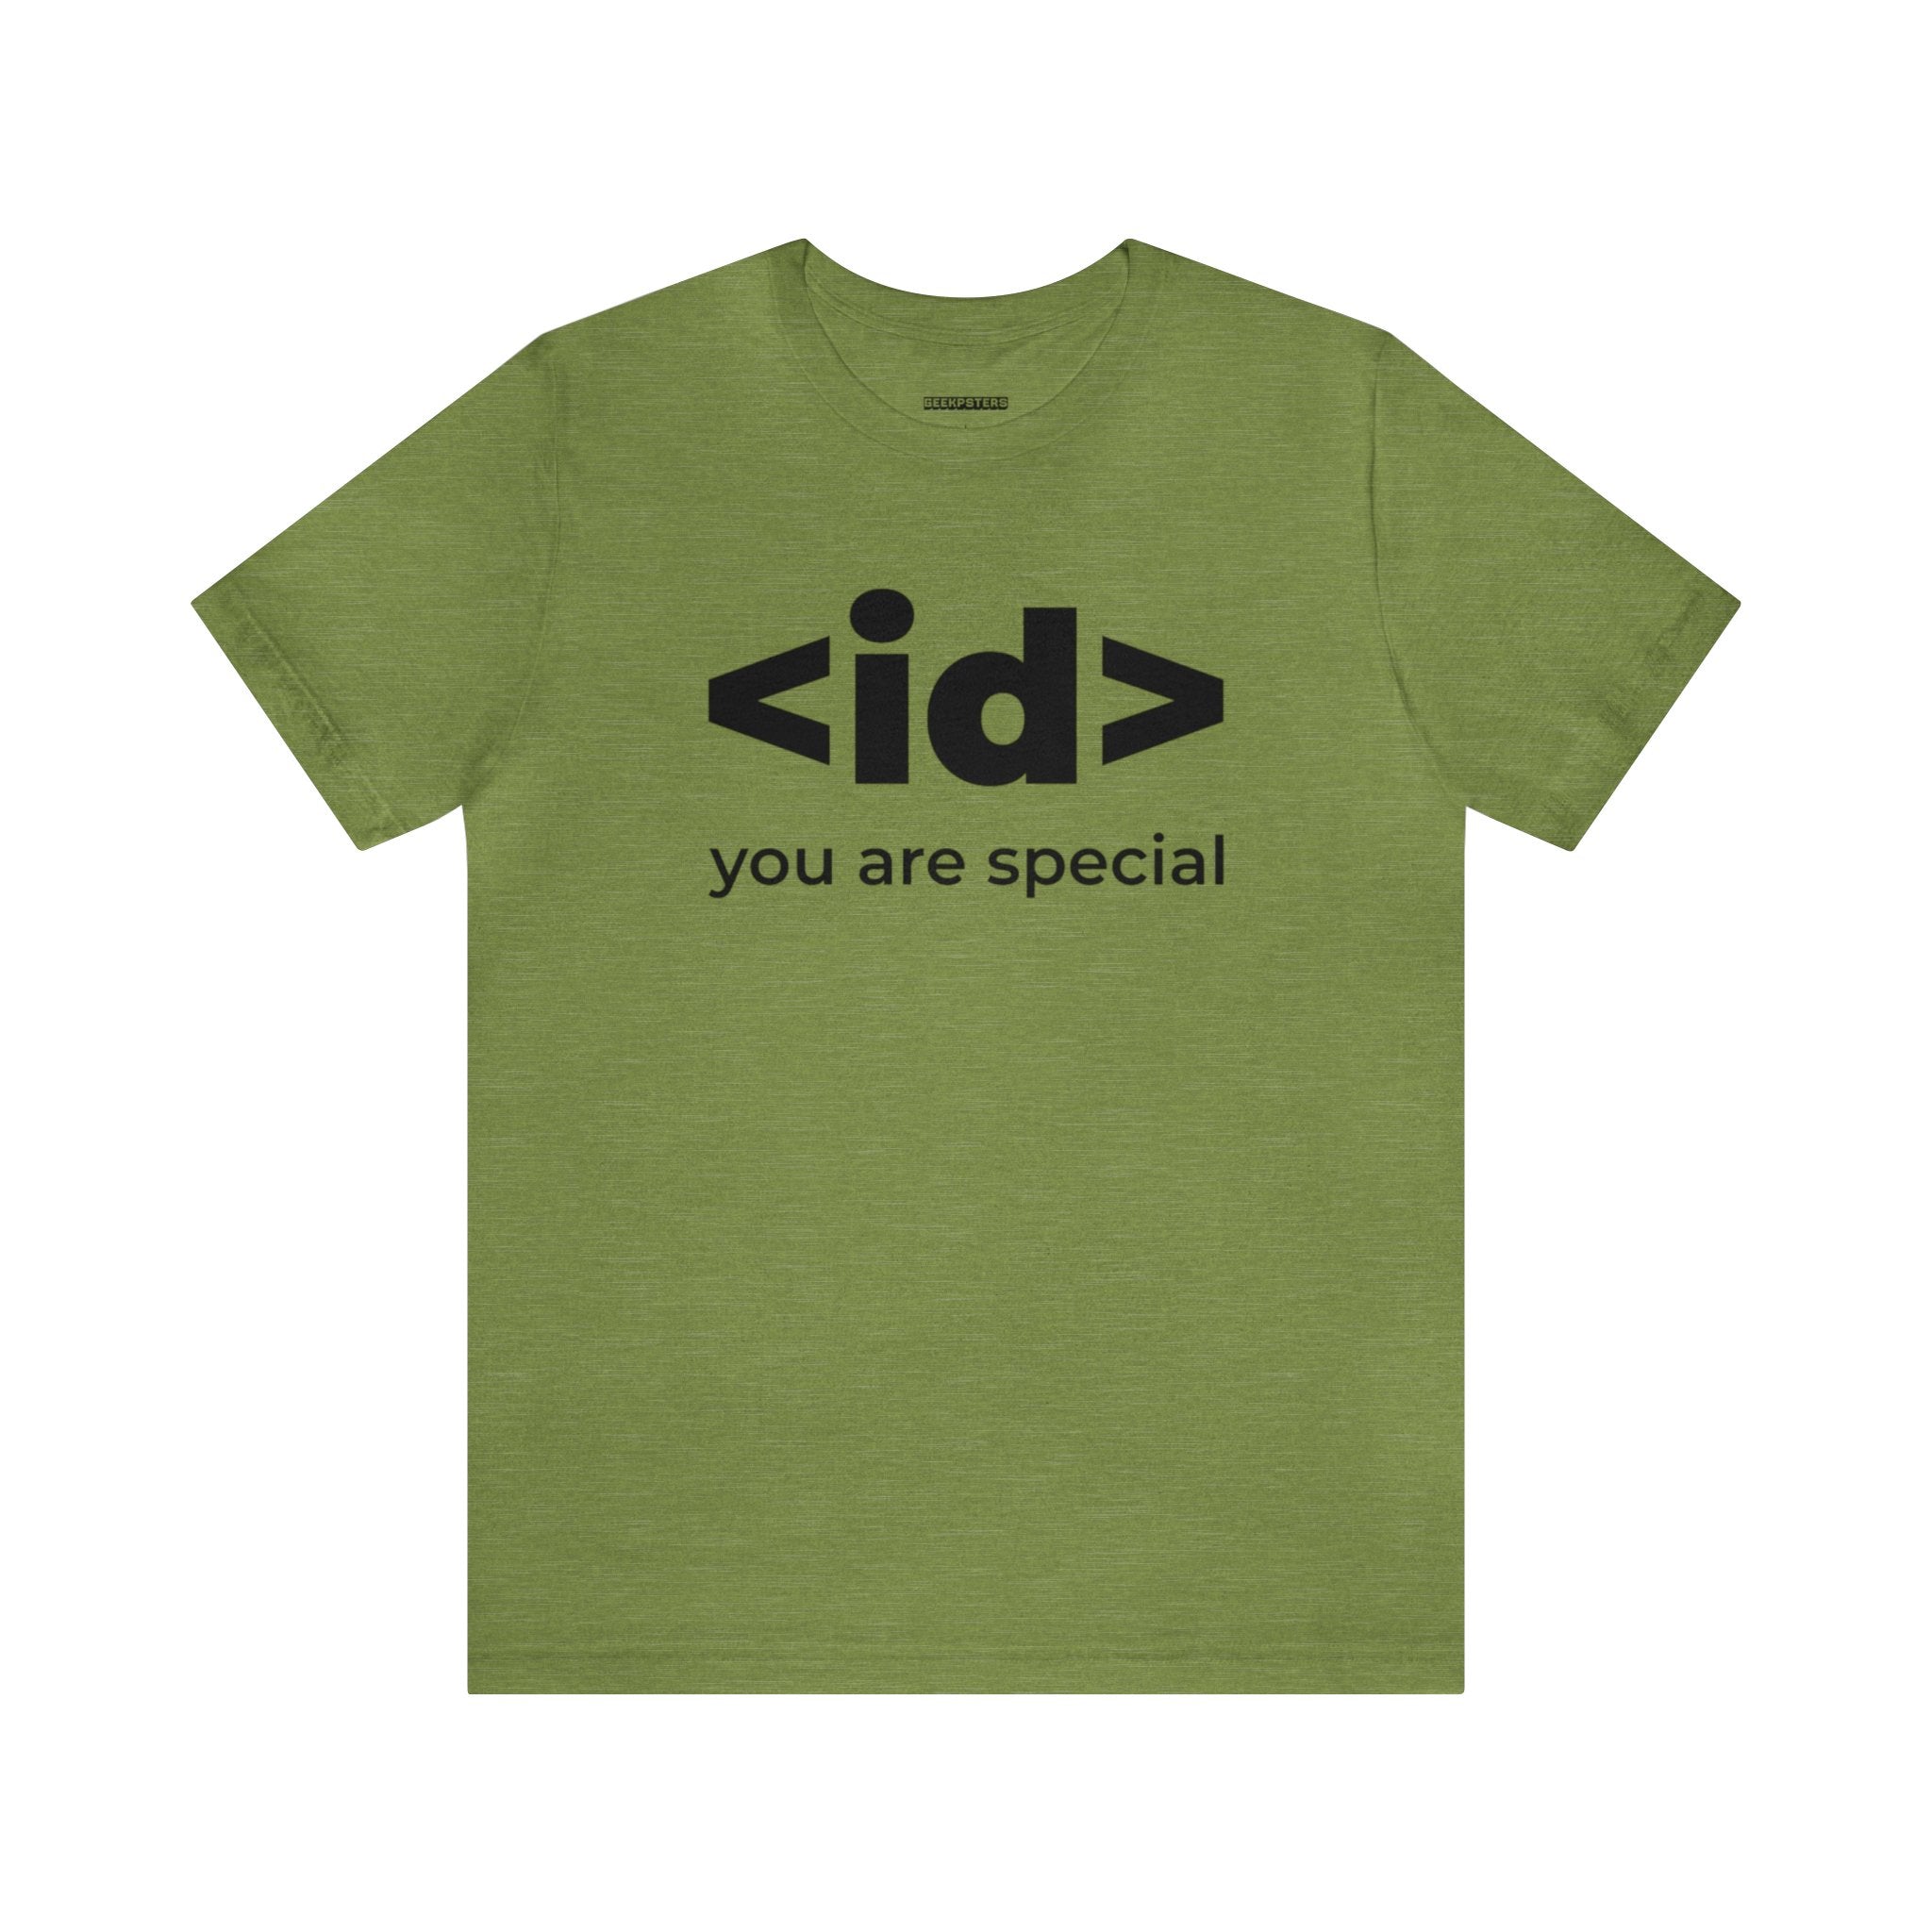 A brilliant <id> You Are Special T-Shirt that showcases your specialness.